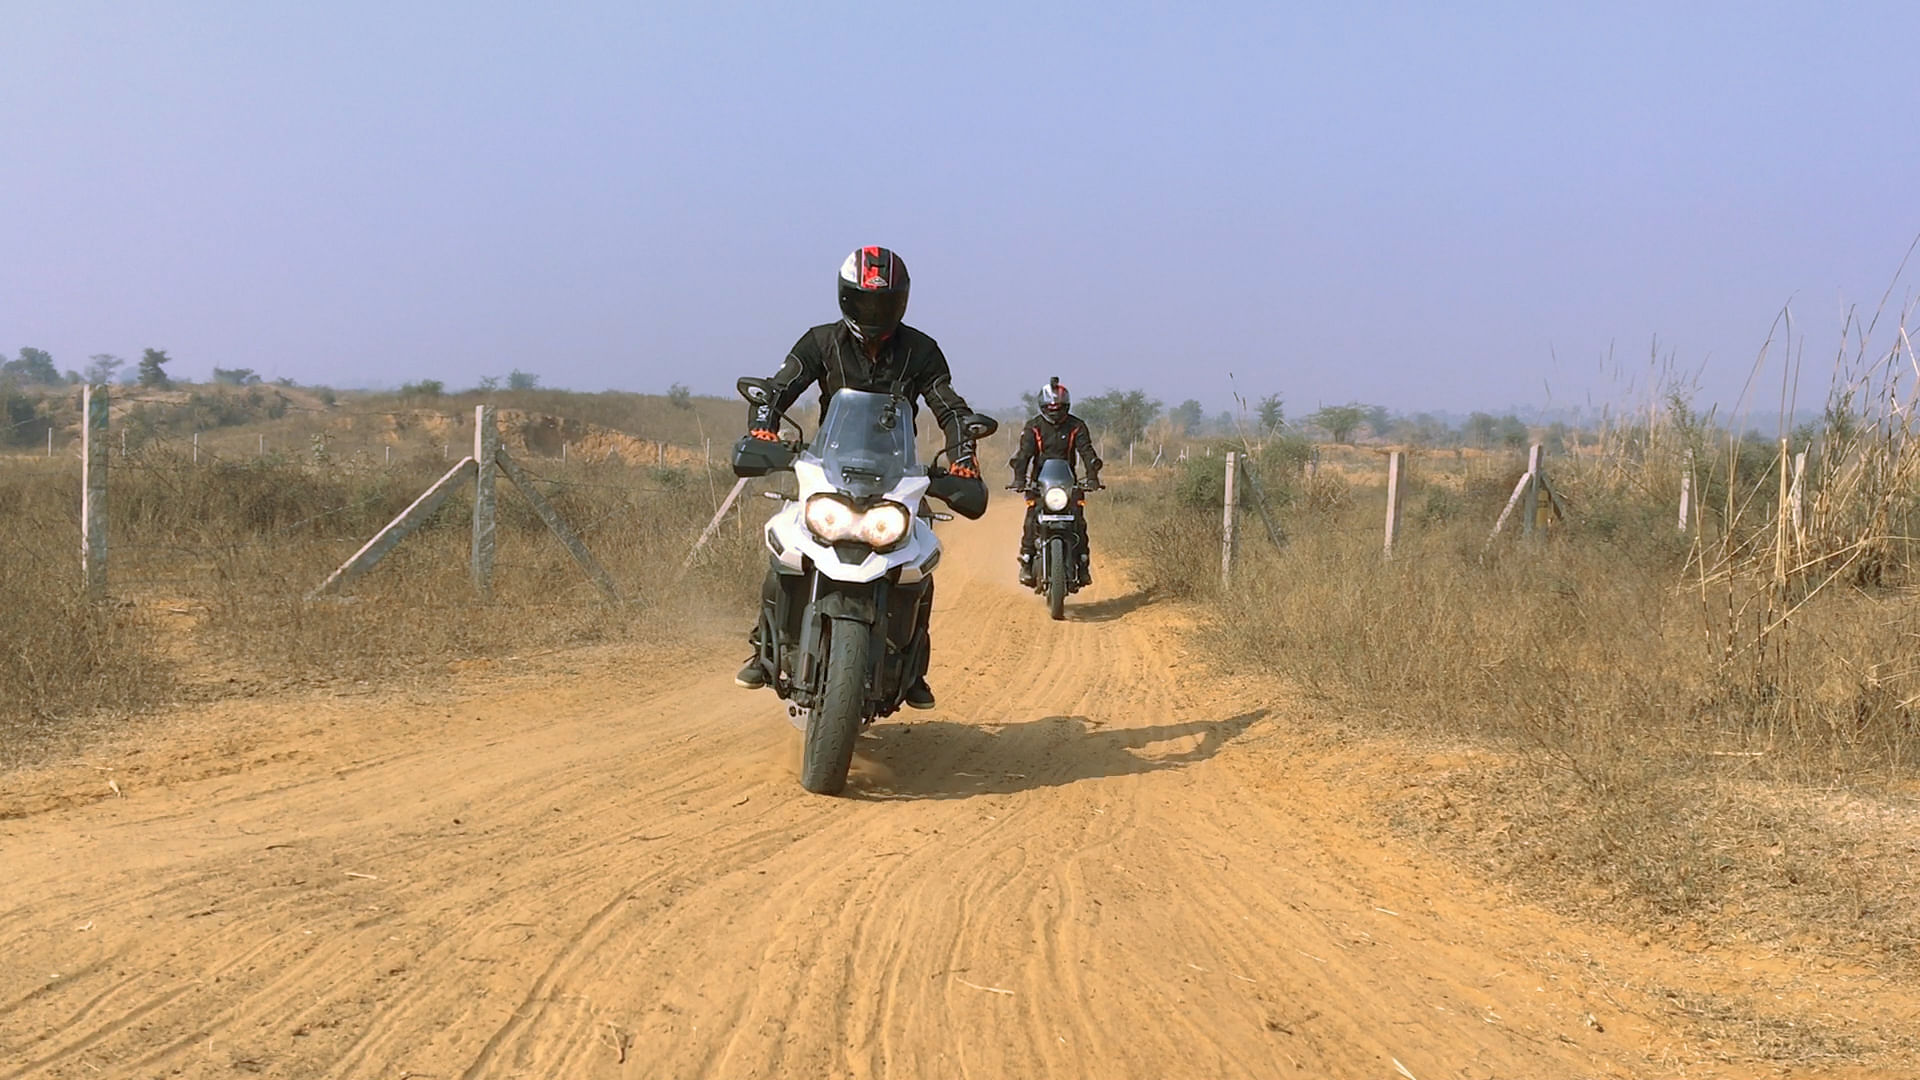 Off-road adventure with the Triumph Tiger Explorer XCx (left) and Royal Enfield Himalayan